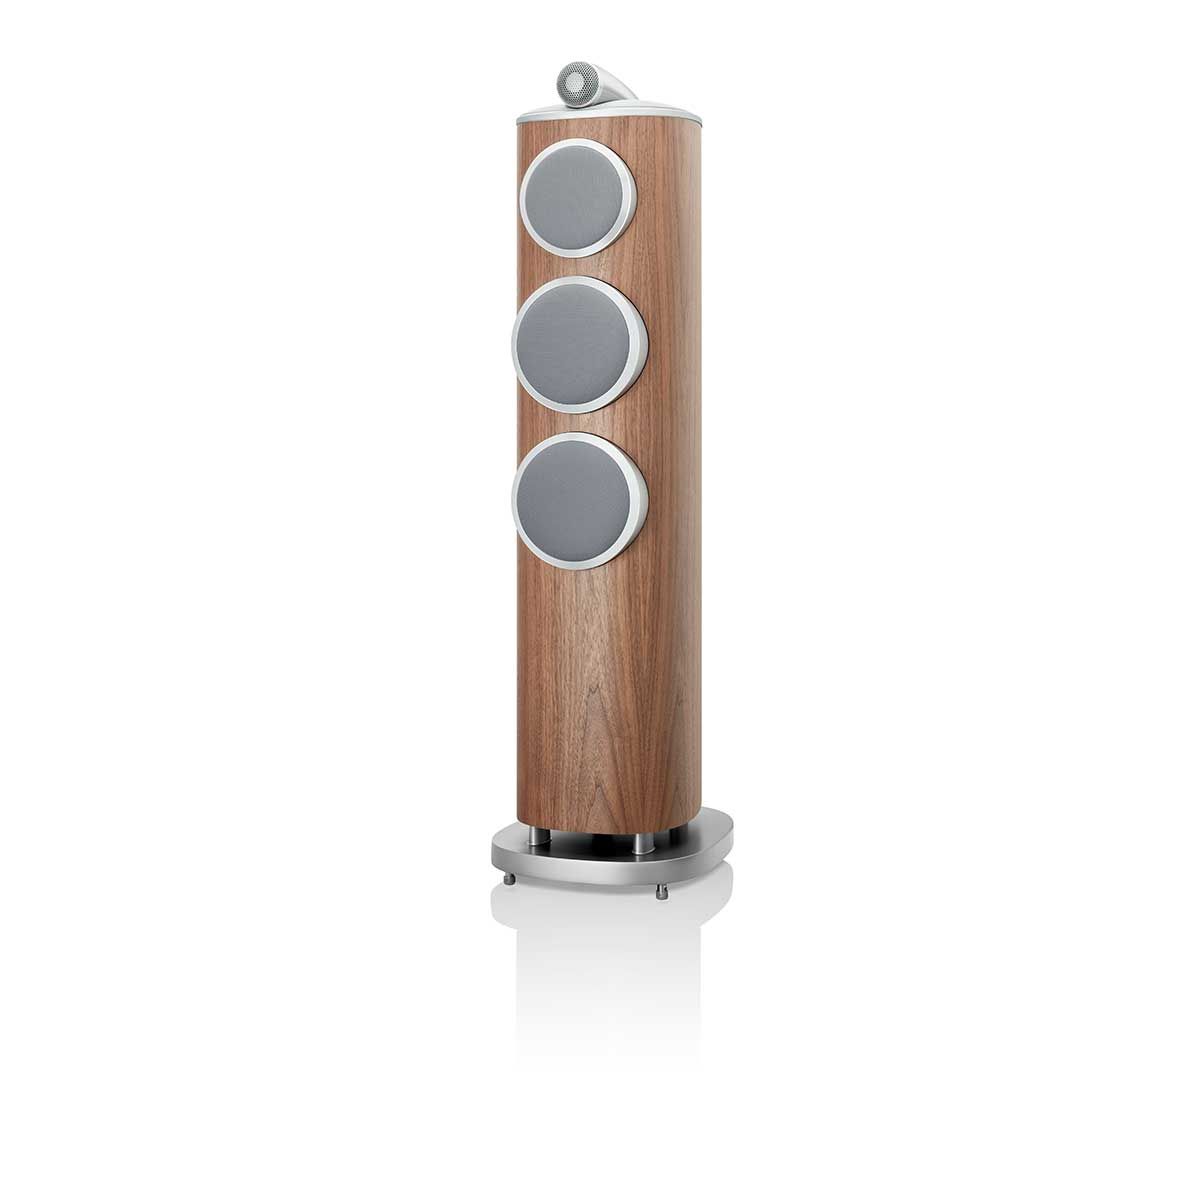 Bowers & Wilkins 804 D4 Floorstanding Speaker, Satin Walnut, front angle with grille